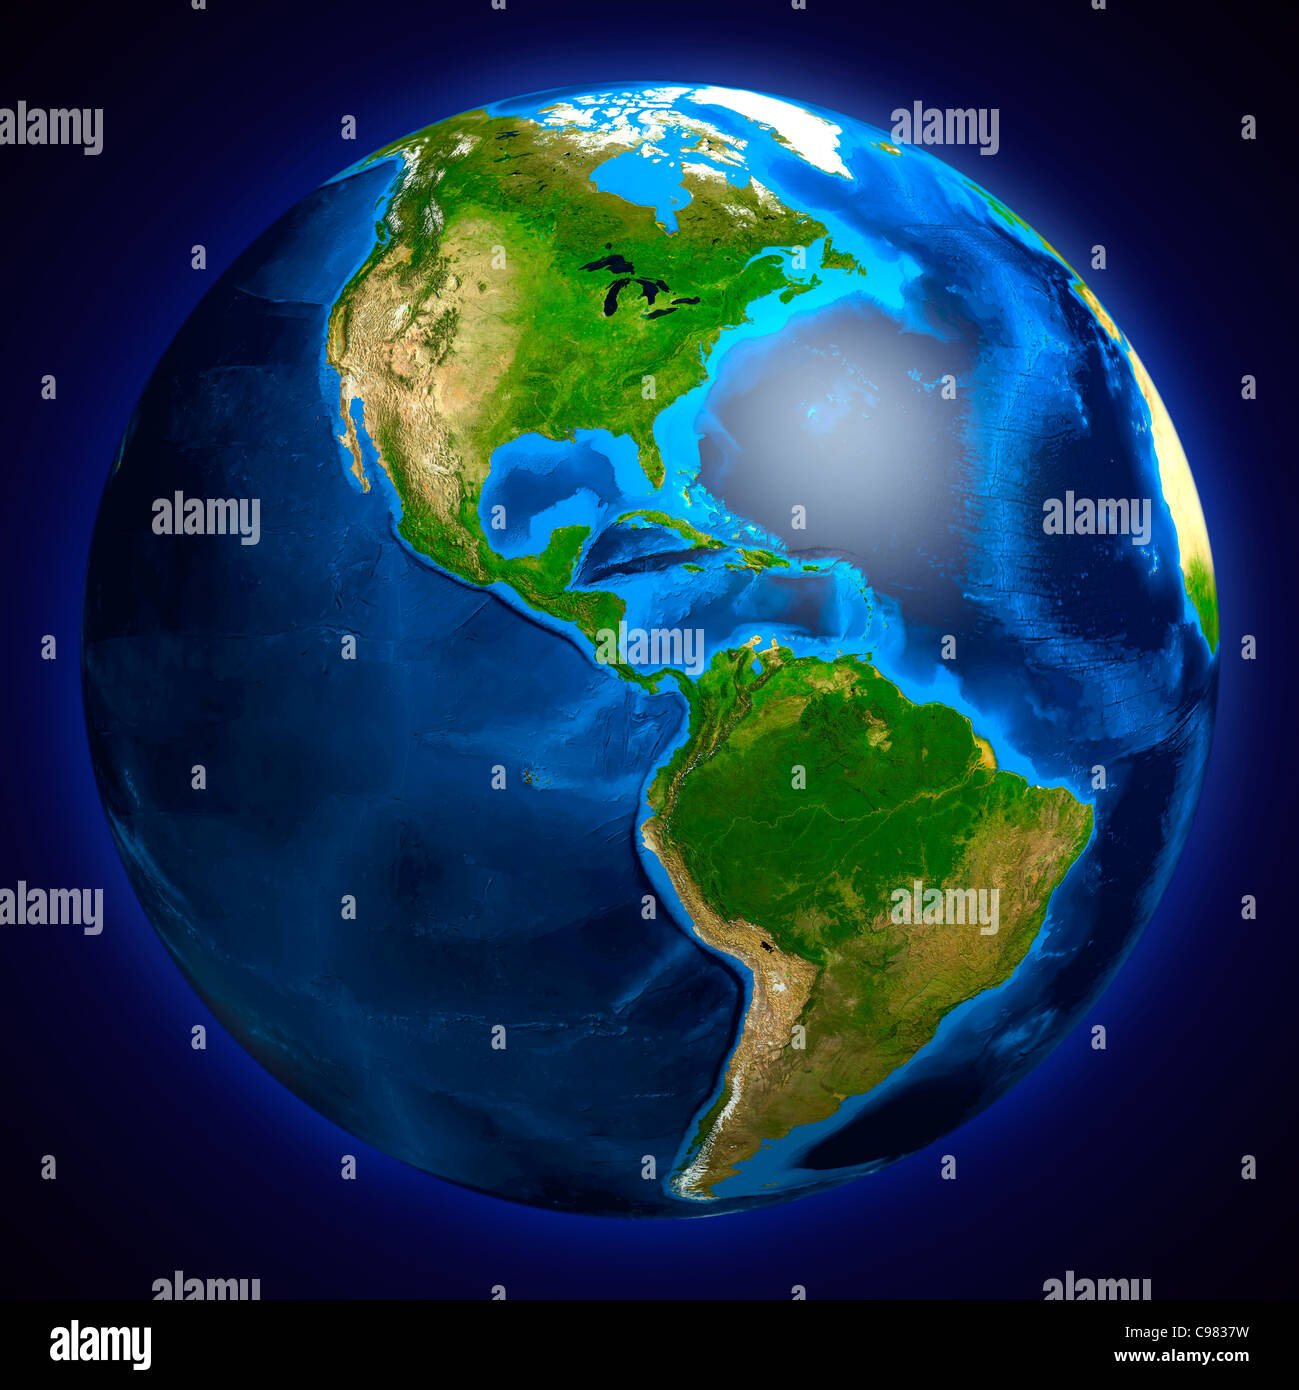 View of the Earth globe from space showing South and North American continents. Isolated on dark blue background. Stock Photo